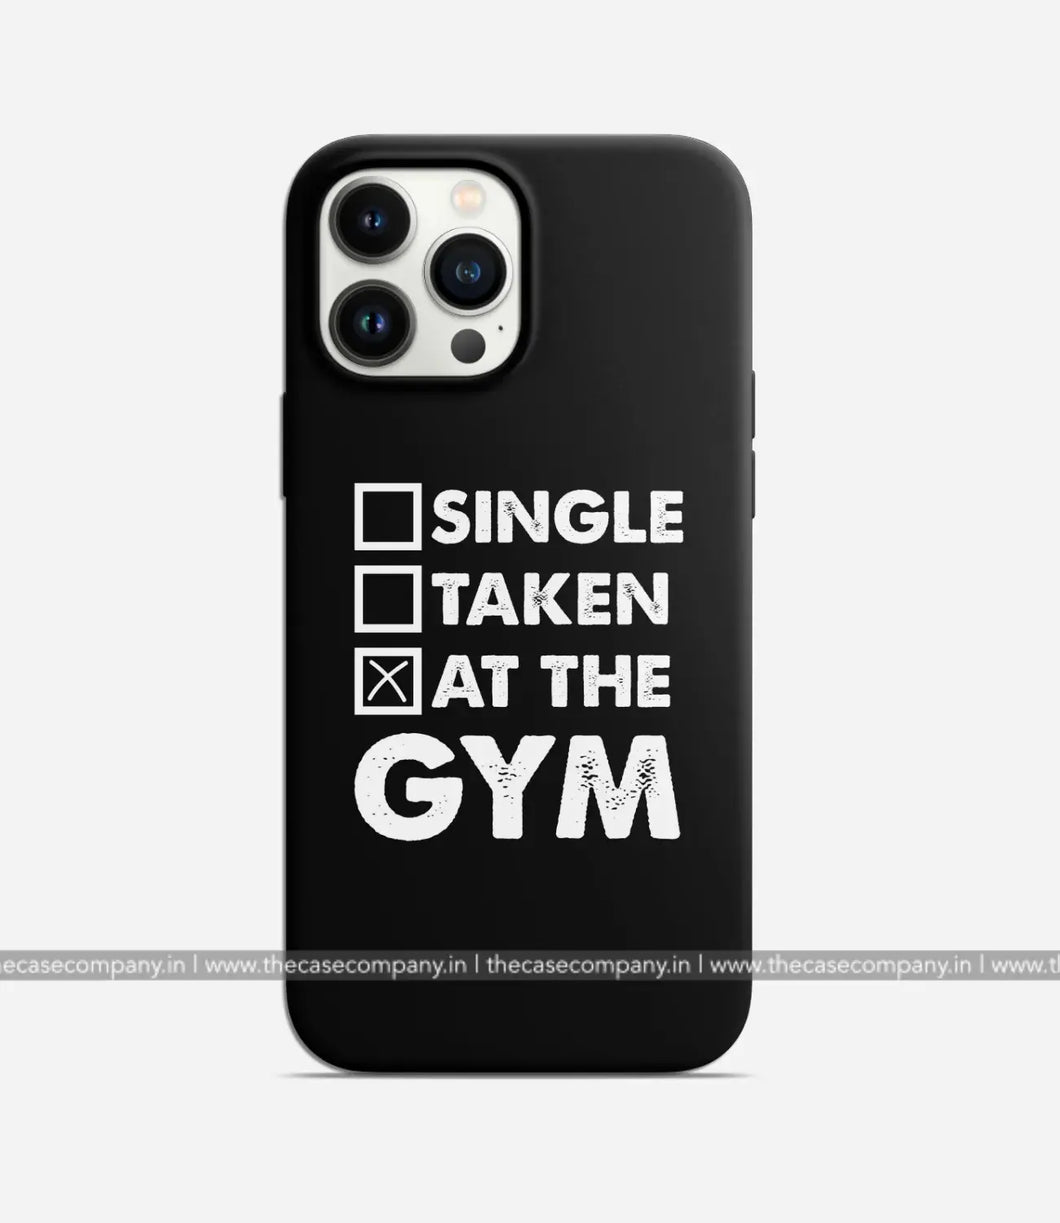 At The Gym Phone Case